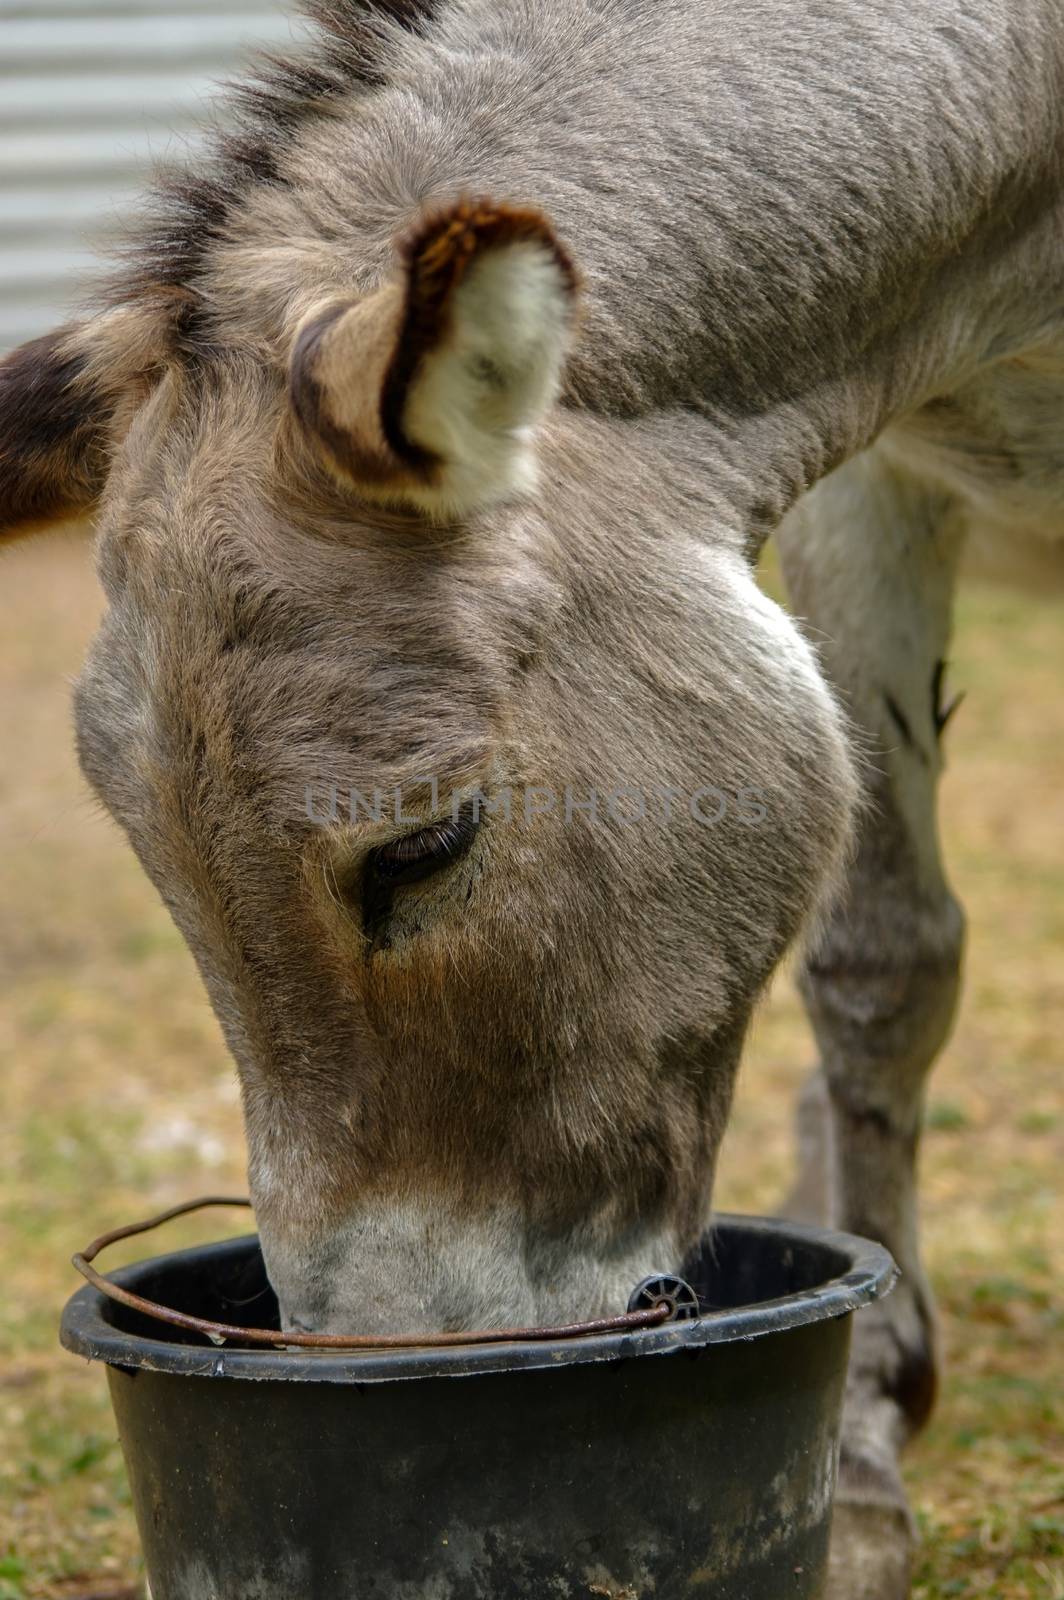 Donkey drinking water out of his trough